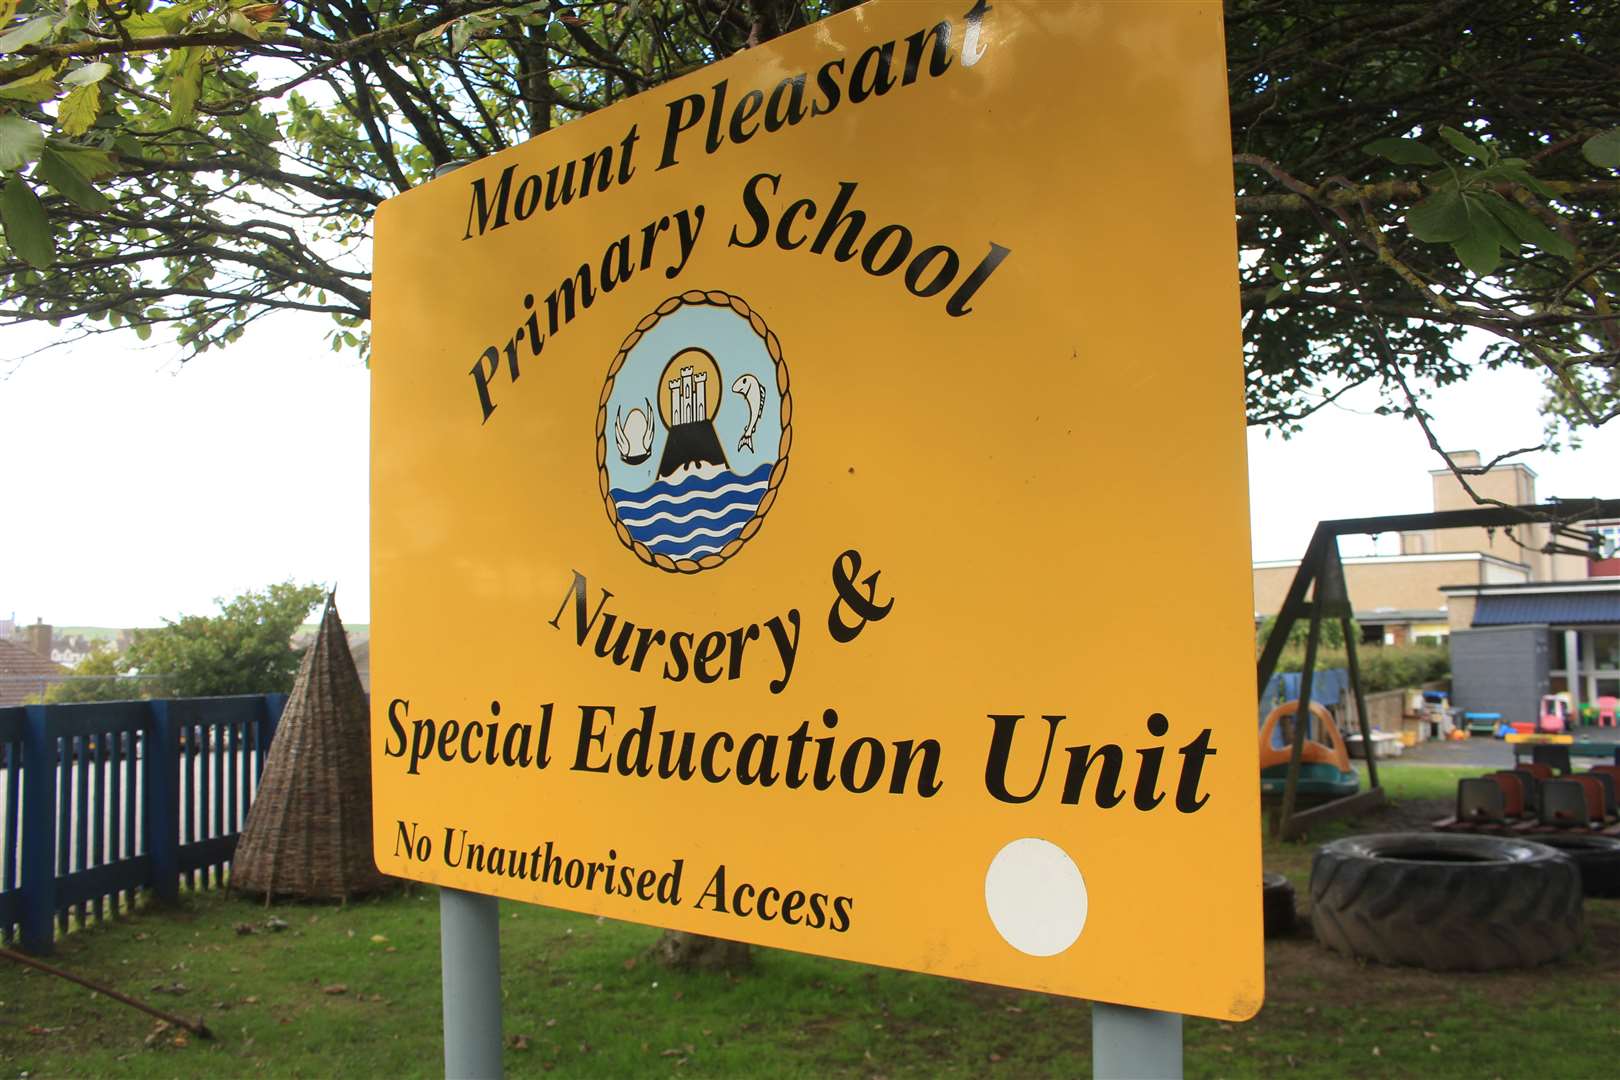 The inspection at the nursery at Mount Pleasant school was carried out by the Care Inspectorate